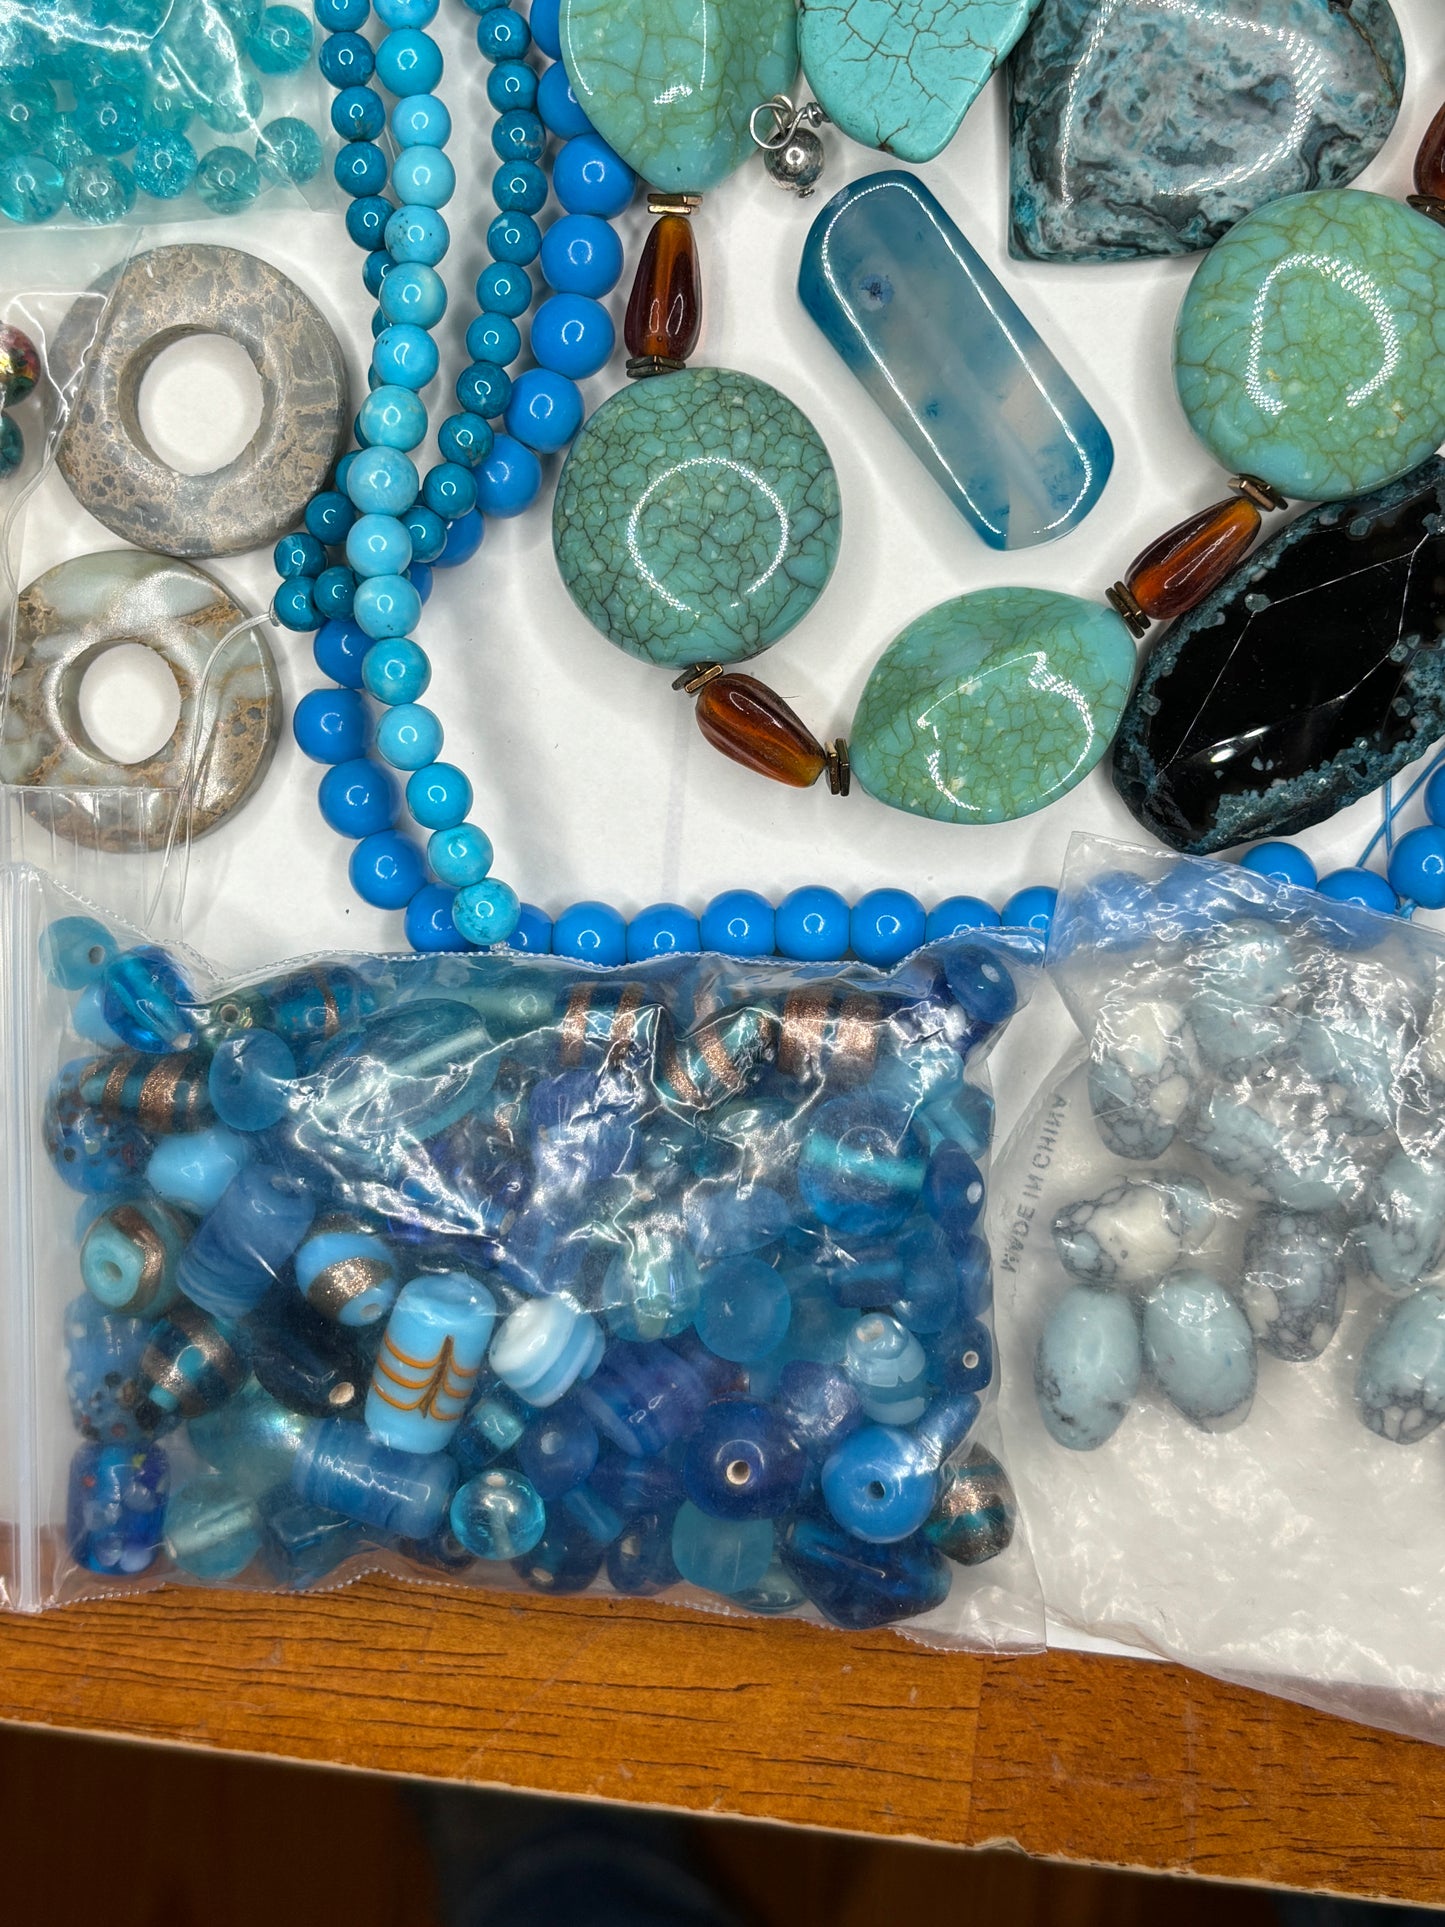 HUGE LOT 4.6 Pounds, Blue and Green Mix Glass and Natural Stone Beads, Grab Bag